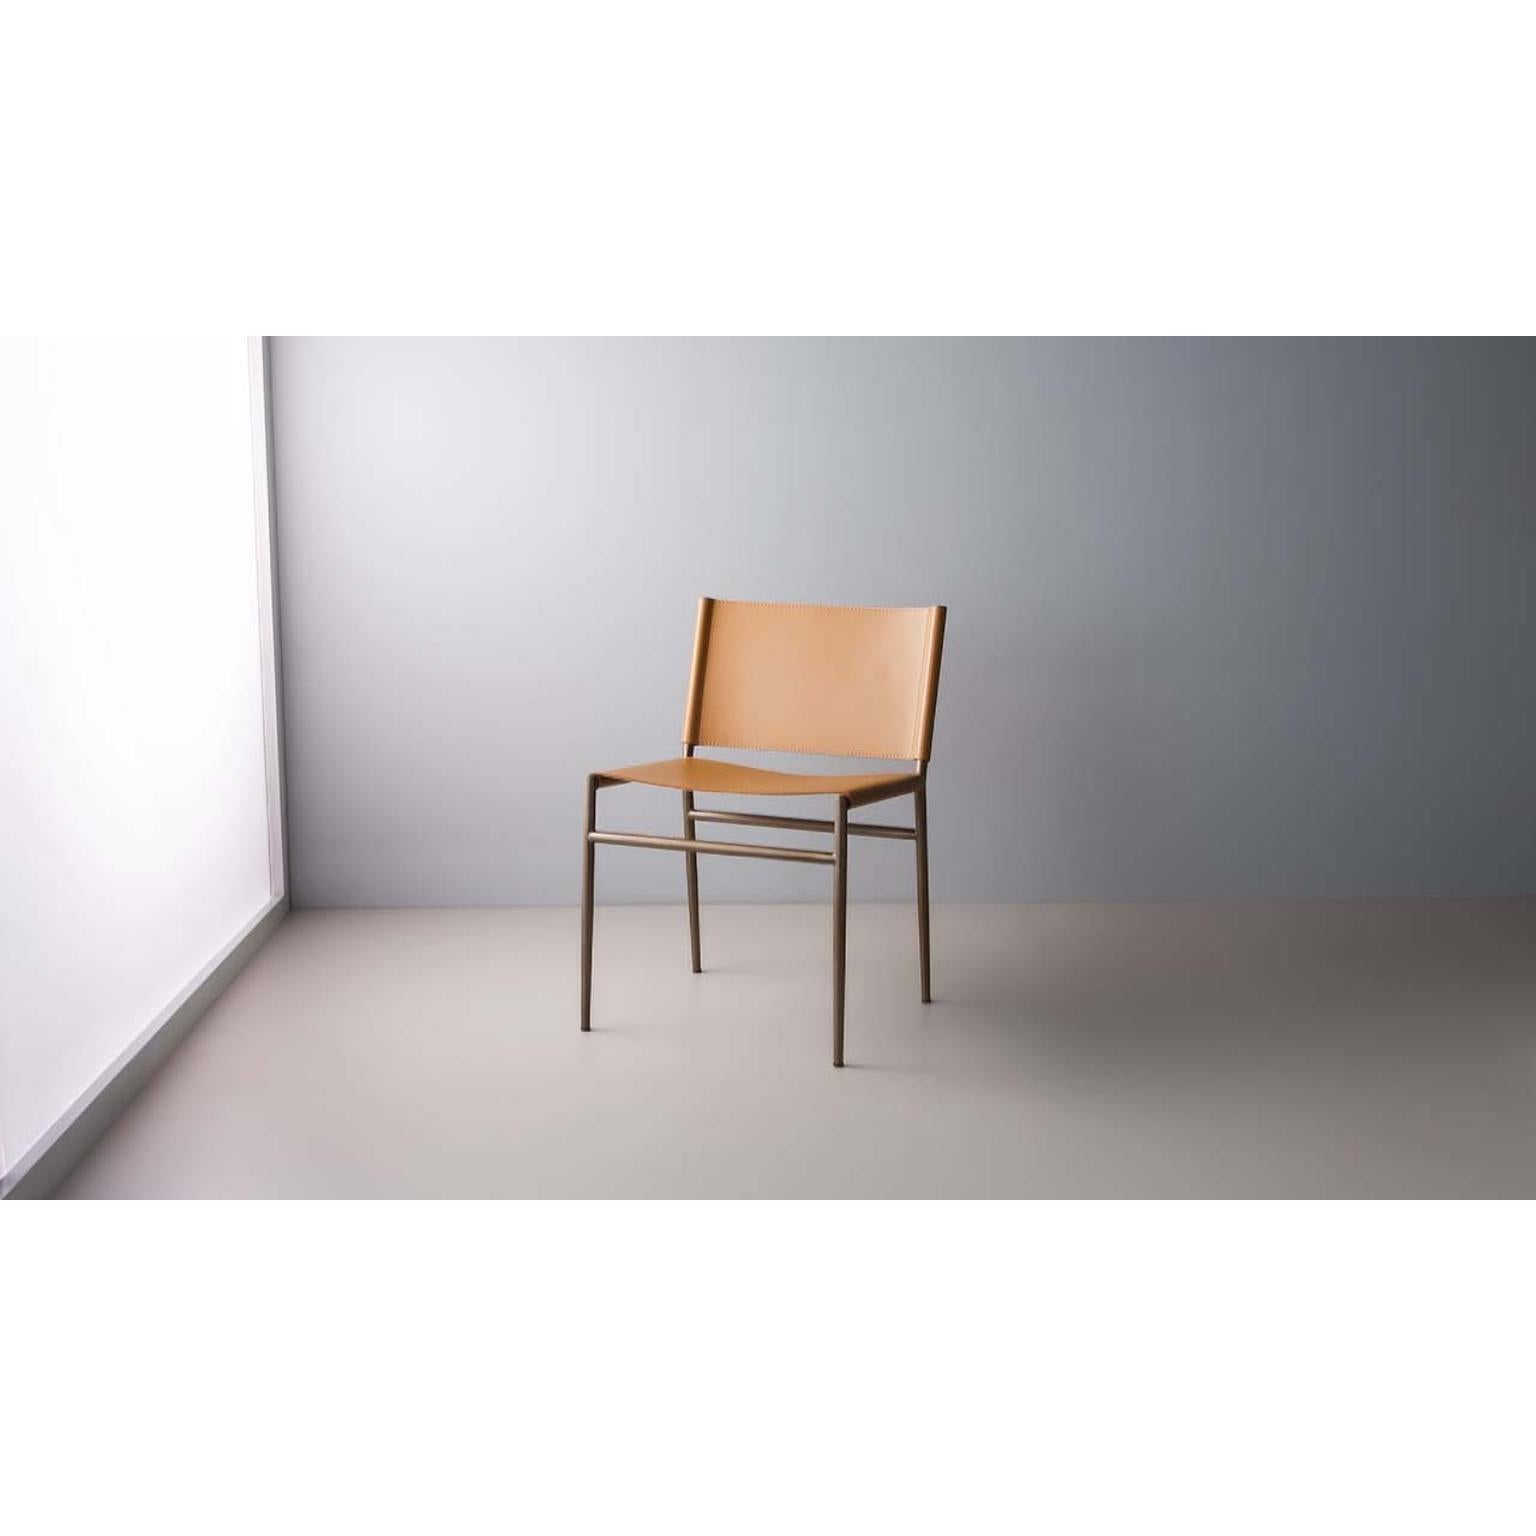 Nit Chair by Doimo Brasil
Dimensions: W 53 x D 56 x H 76 cm 
Materials: Metal, upholstered seat. 


With the intention of providing good taste and personality, Doimo deciphers trends and follows the evolution of man and his space. To this end, it